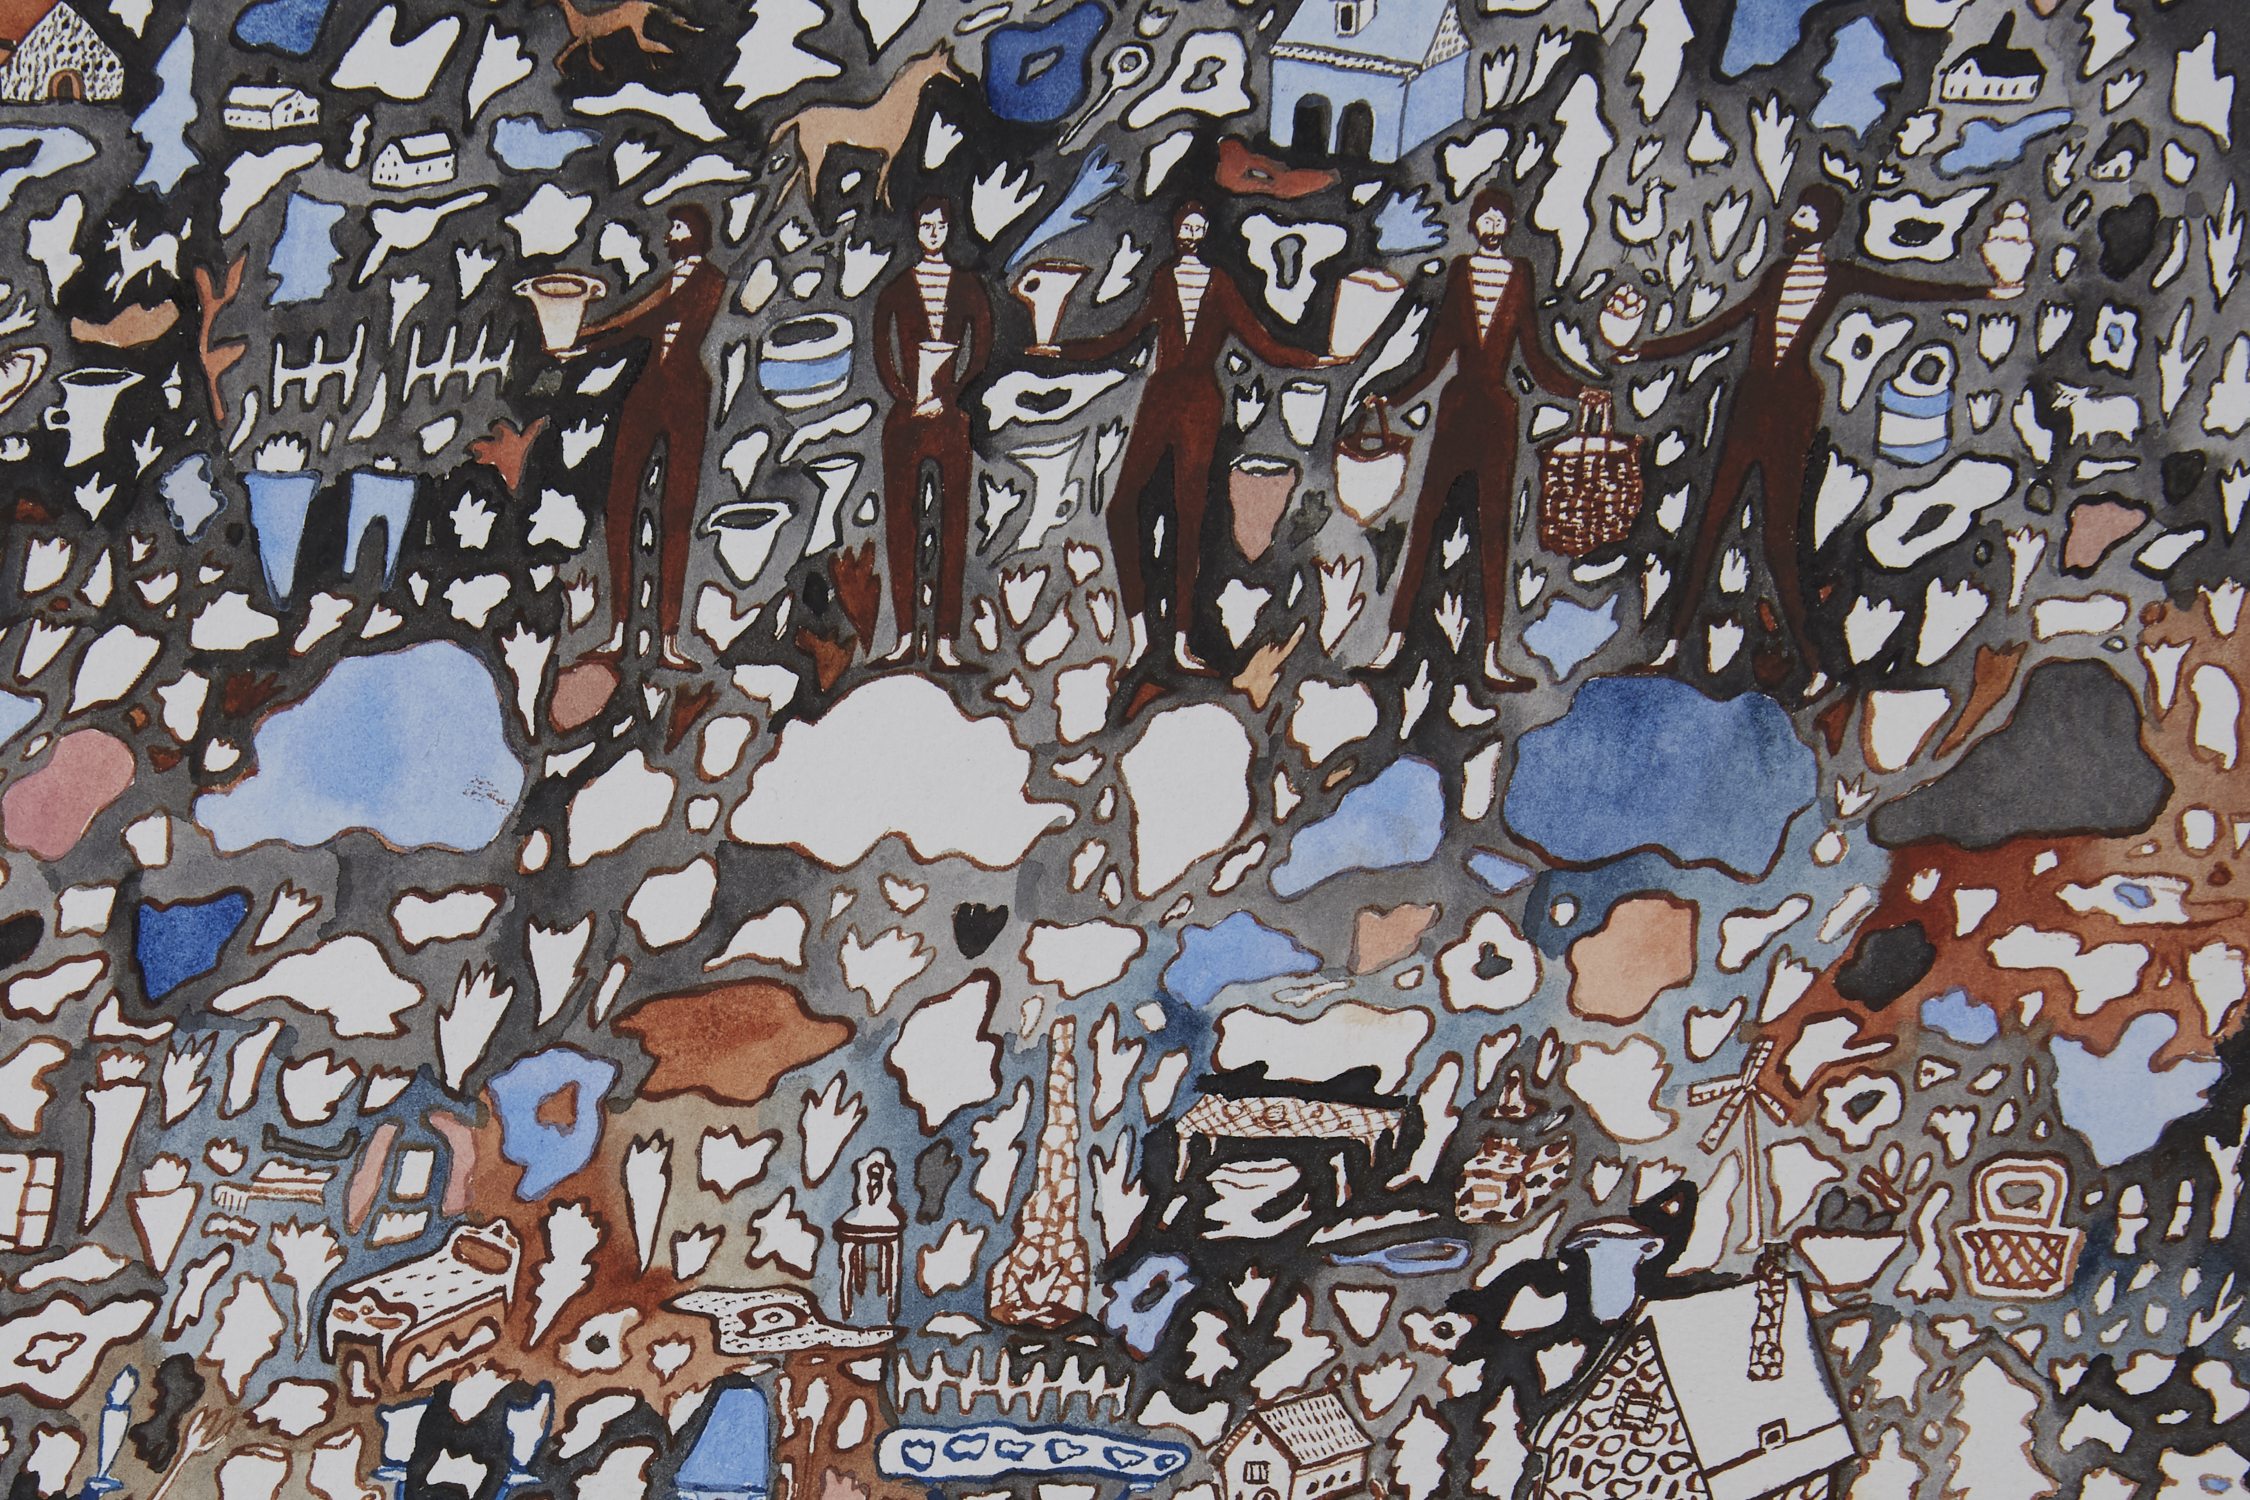   The French Villagers, detail   Gouache and watercolor on paper, 2014  11” x 15”  $500  Available 